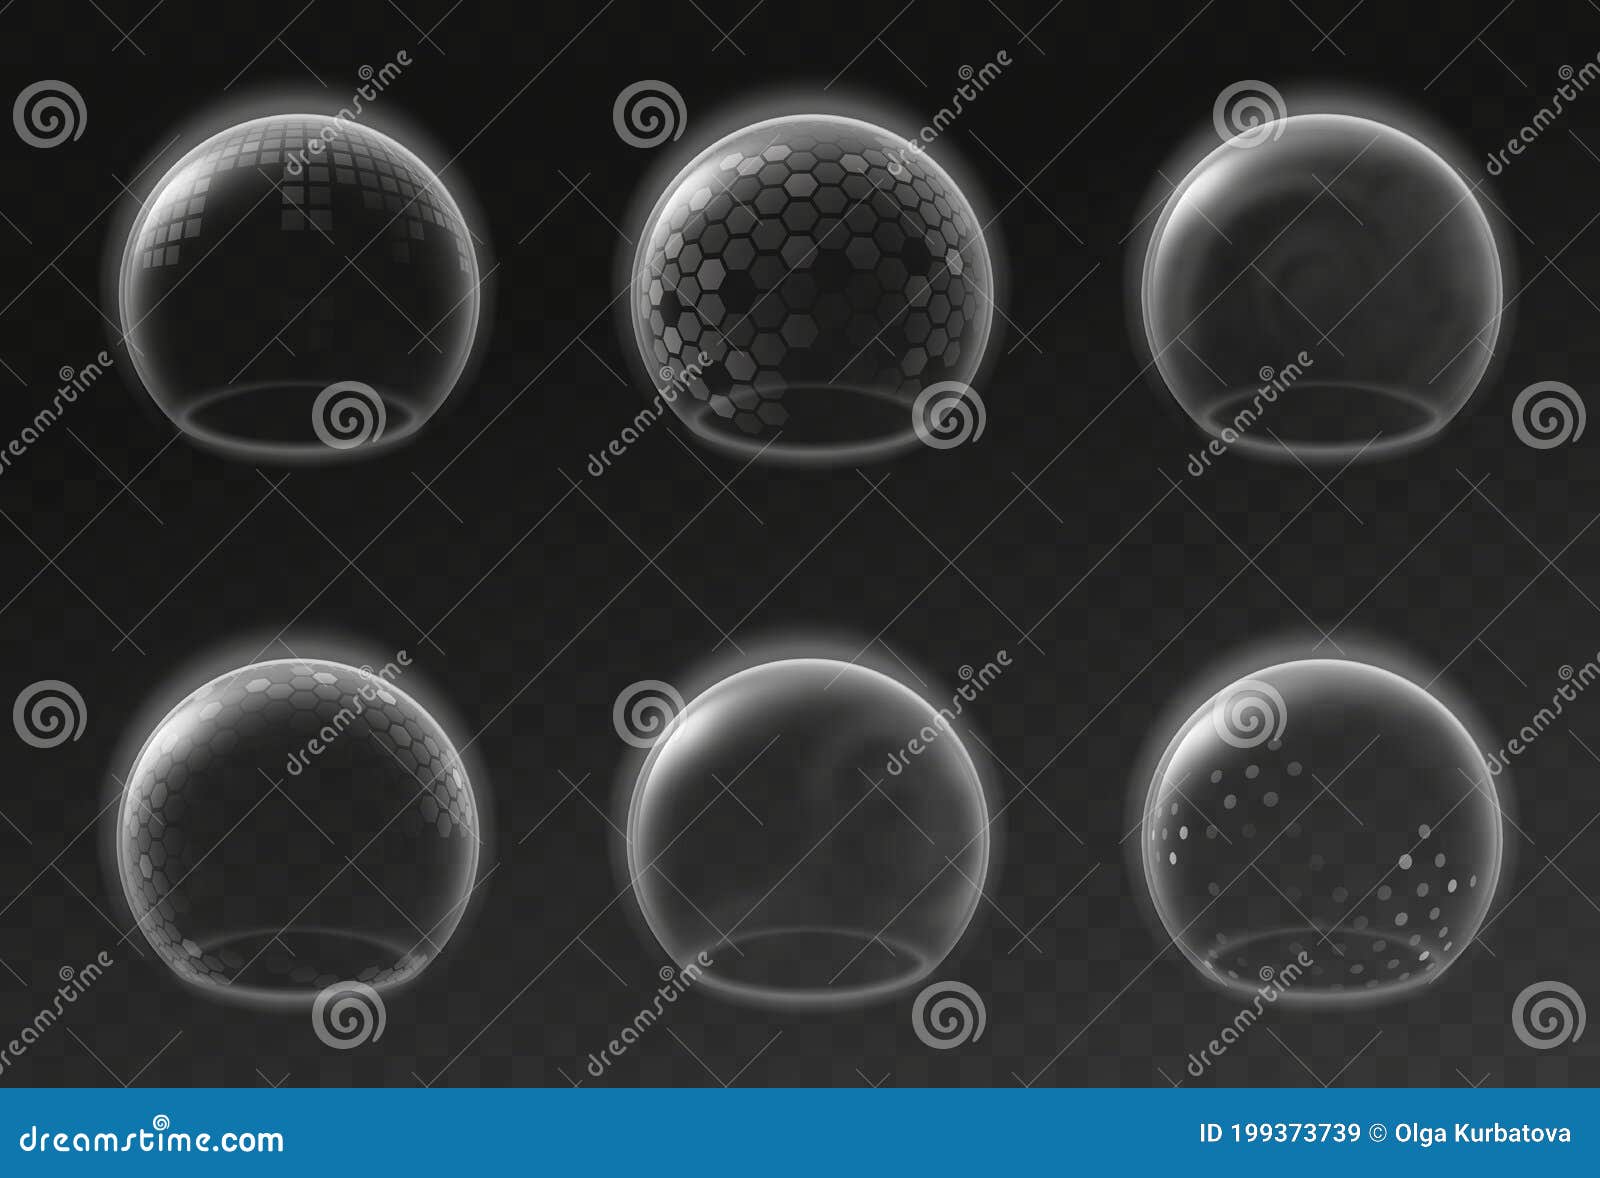 force field. bubble shields covid-19 security defense safety, energy barrier of immune mockup, realistic antiviral domes